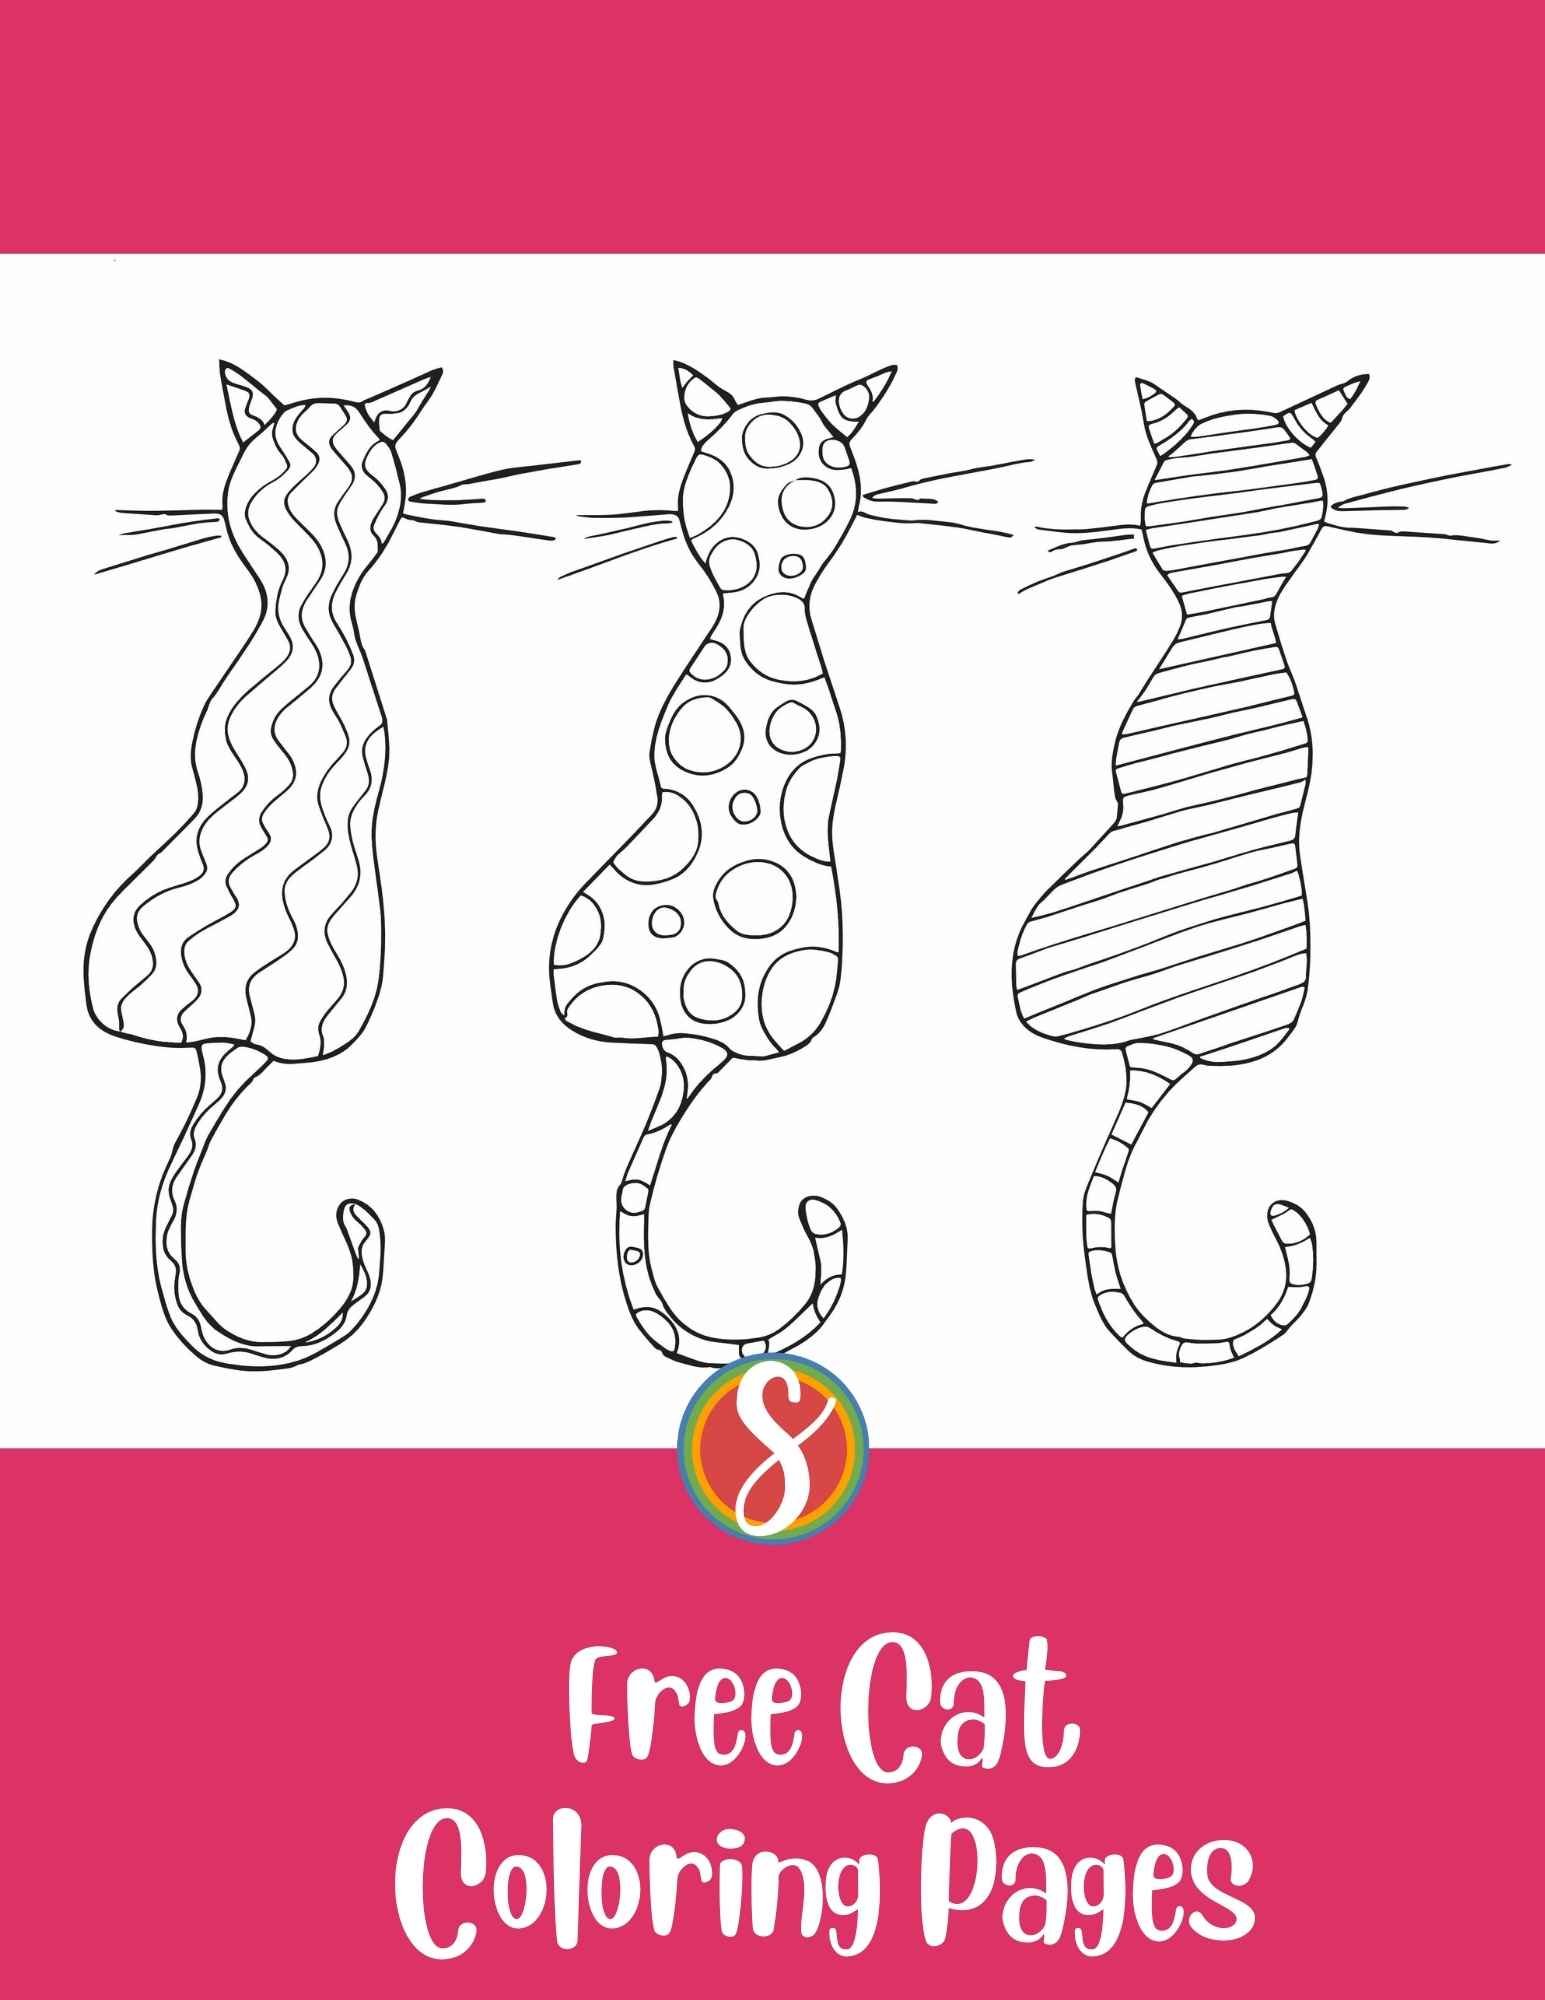 cat coloring page with 3 cat outines filled with simple doodles to color